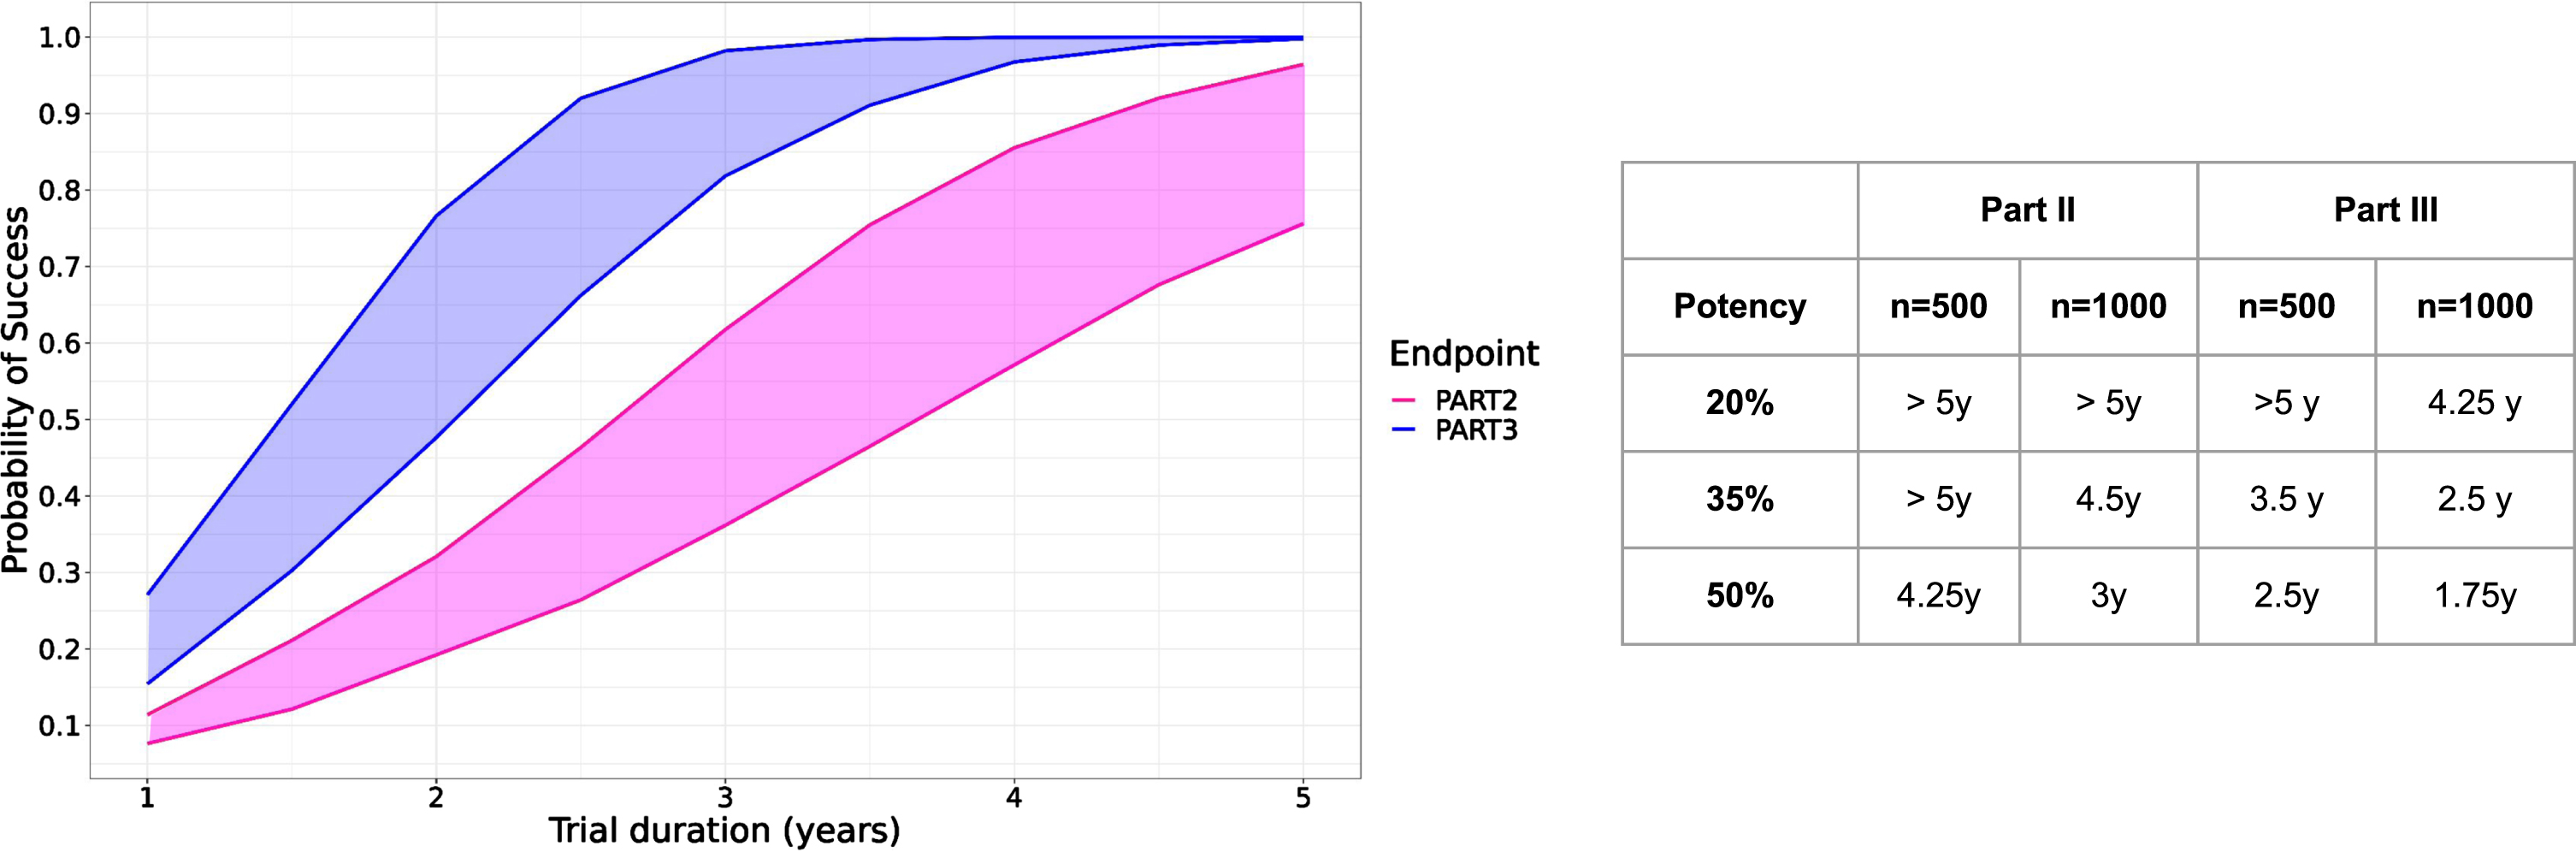 Left: Predicted probability of study success as function of trial duration over 10’000 simulated clinical trials with 500 (lower curves) and 1000 subjects (upper curves) with part II (pink) or part III (blue) or as study endpoint with a hypothetical treatment effect reducing progression by 35%. Right panel: Time needed to achieve 90% probability of success for three different treatment potencies (20–50%) and two different sample sizes (n = 500, 1000).